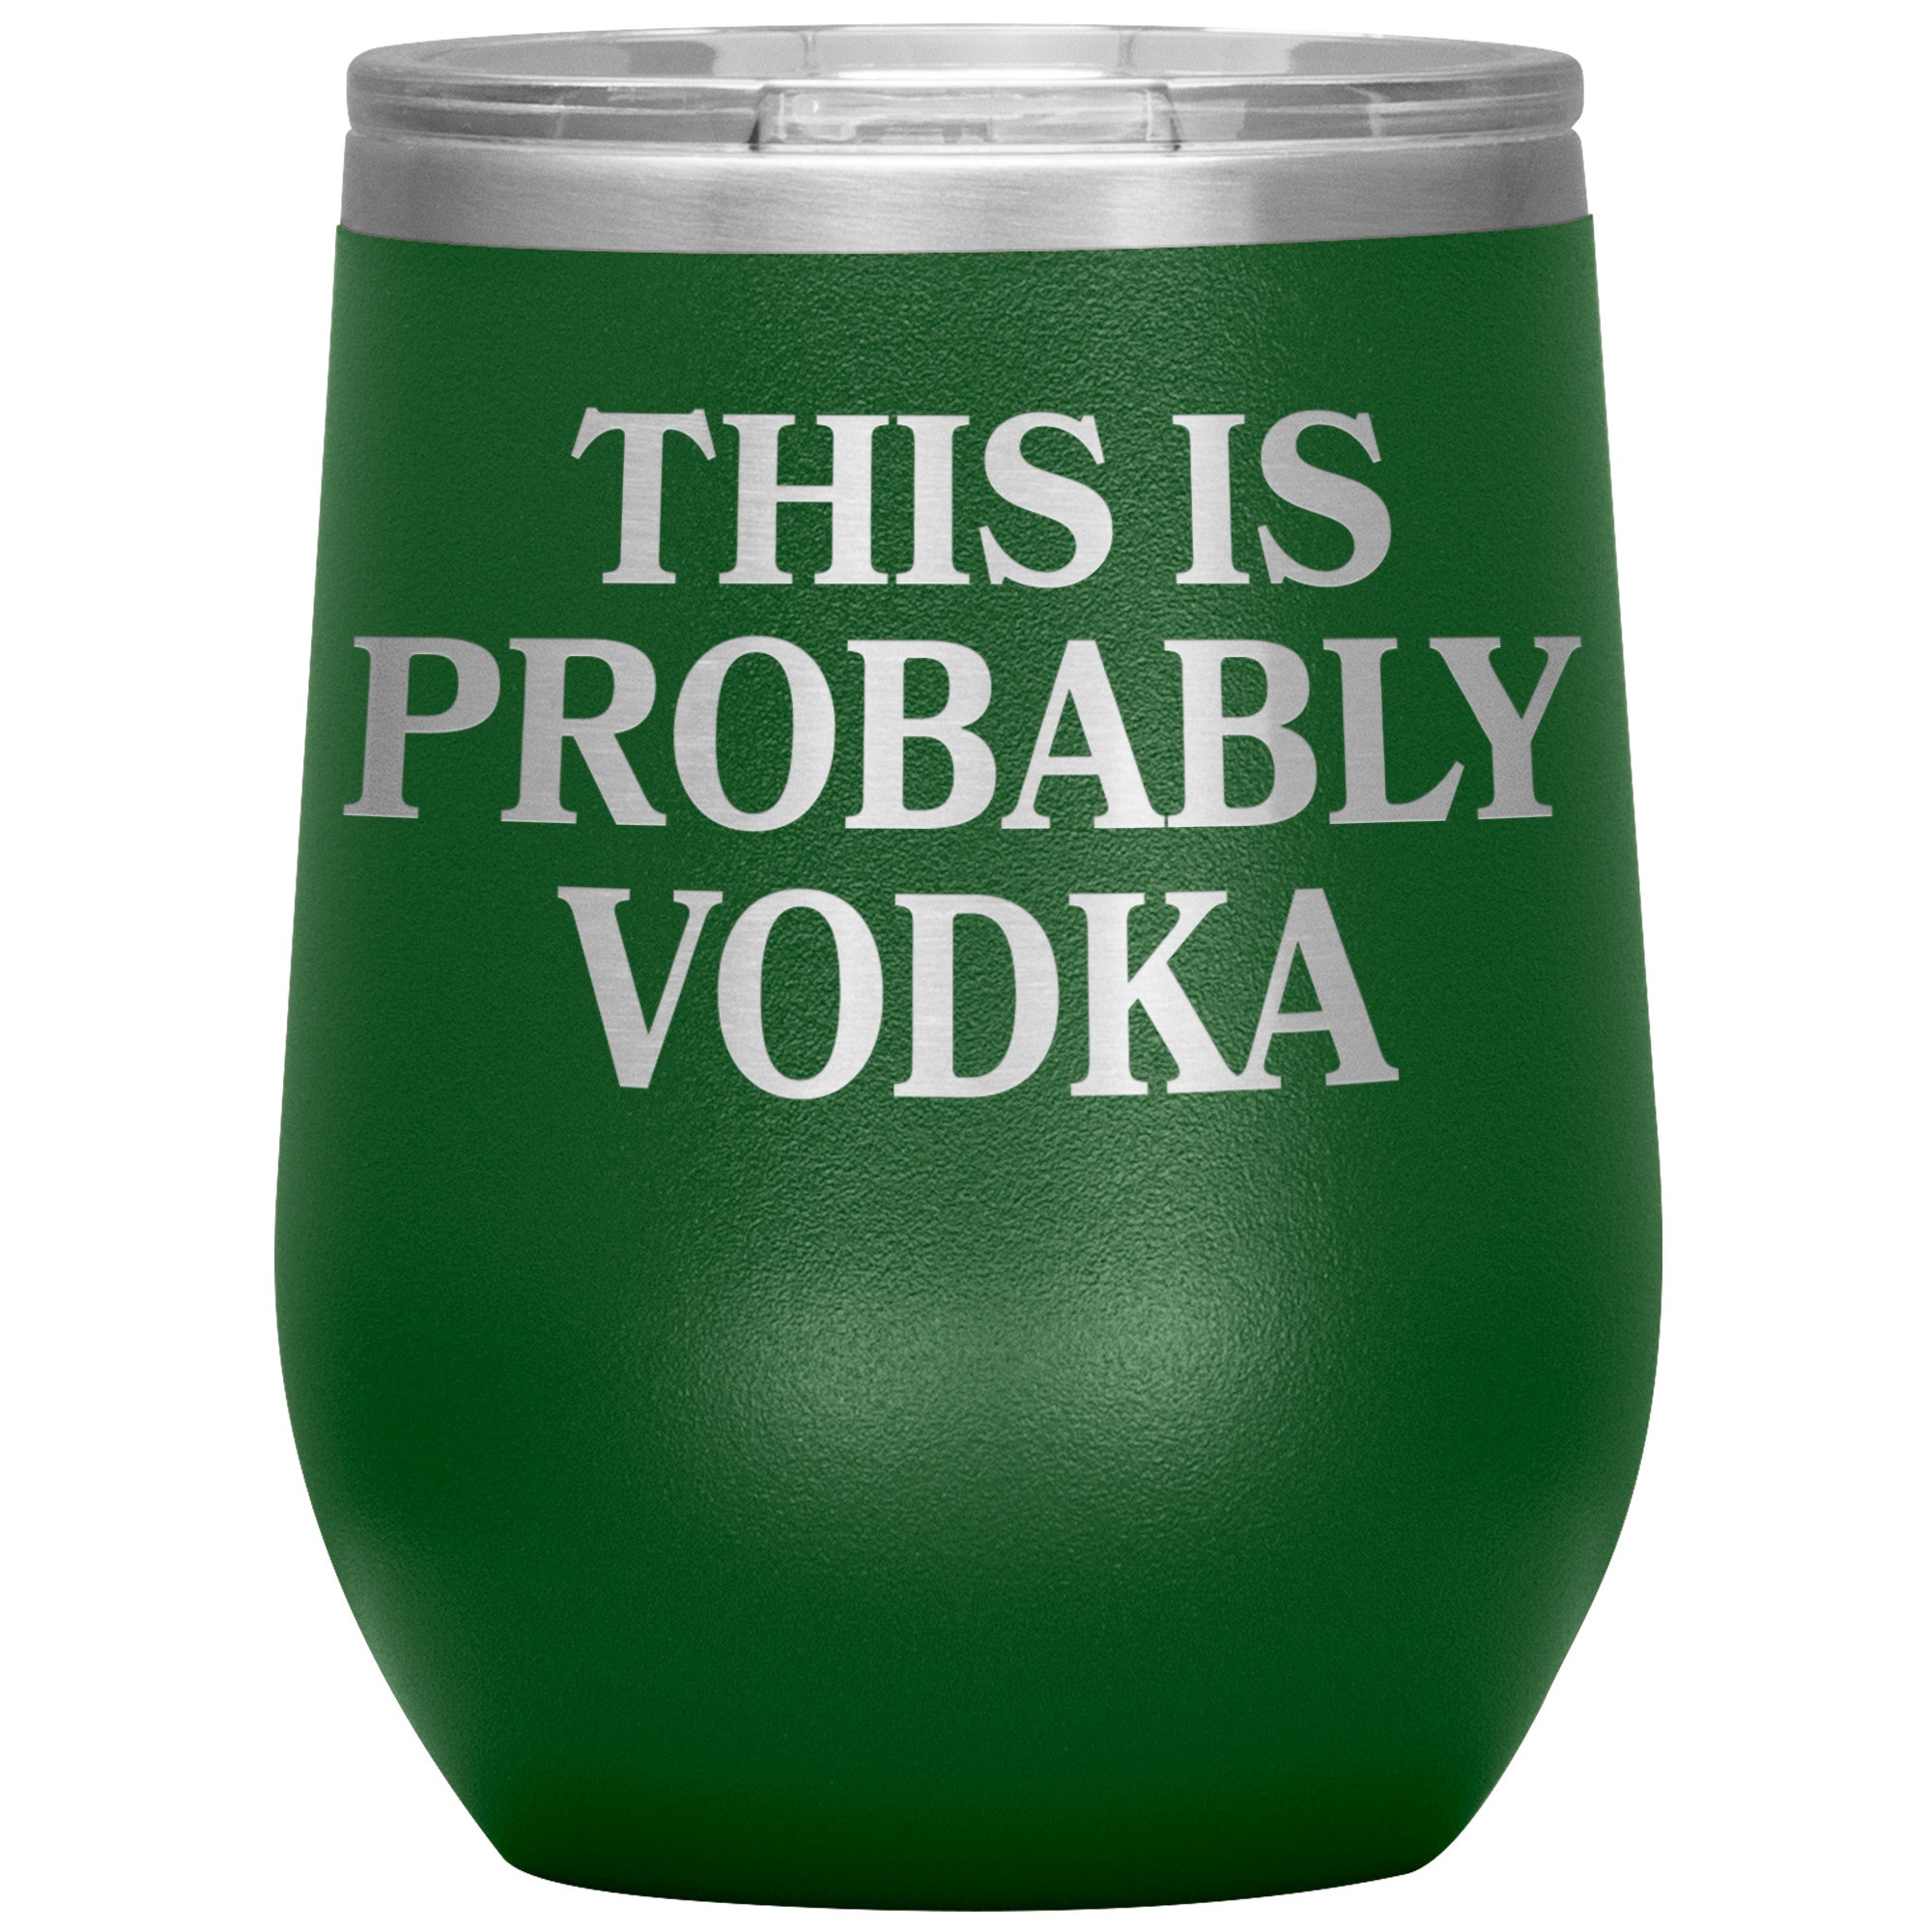 This Is Probably Vodka Insulated Wine Tumbler Tumblers teelaunch Green  